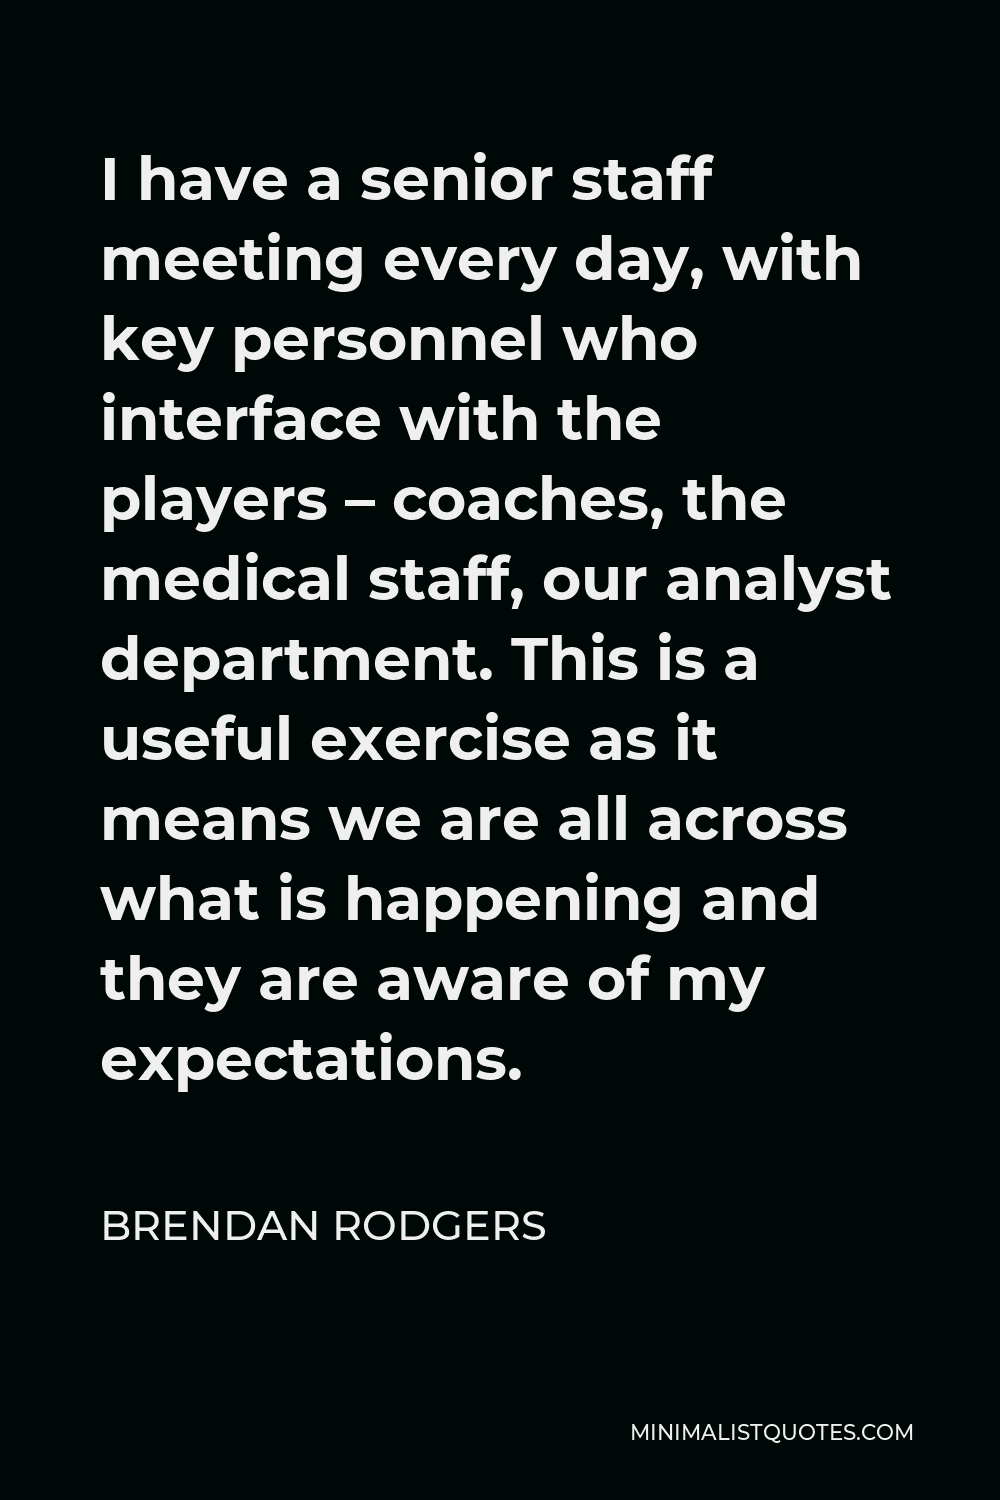 Brendan Rodgers Quote - I have a senior staff meeting every day, with key personnel who interface with the players – coaches, the medical staff, our analyst department. This is a useful exercise as it means we are all across what is happening and they are aware of my expectations.